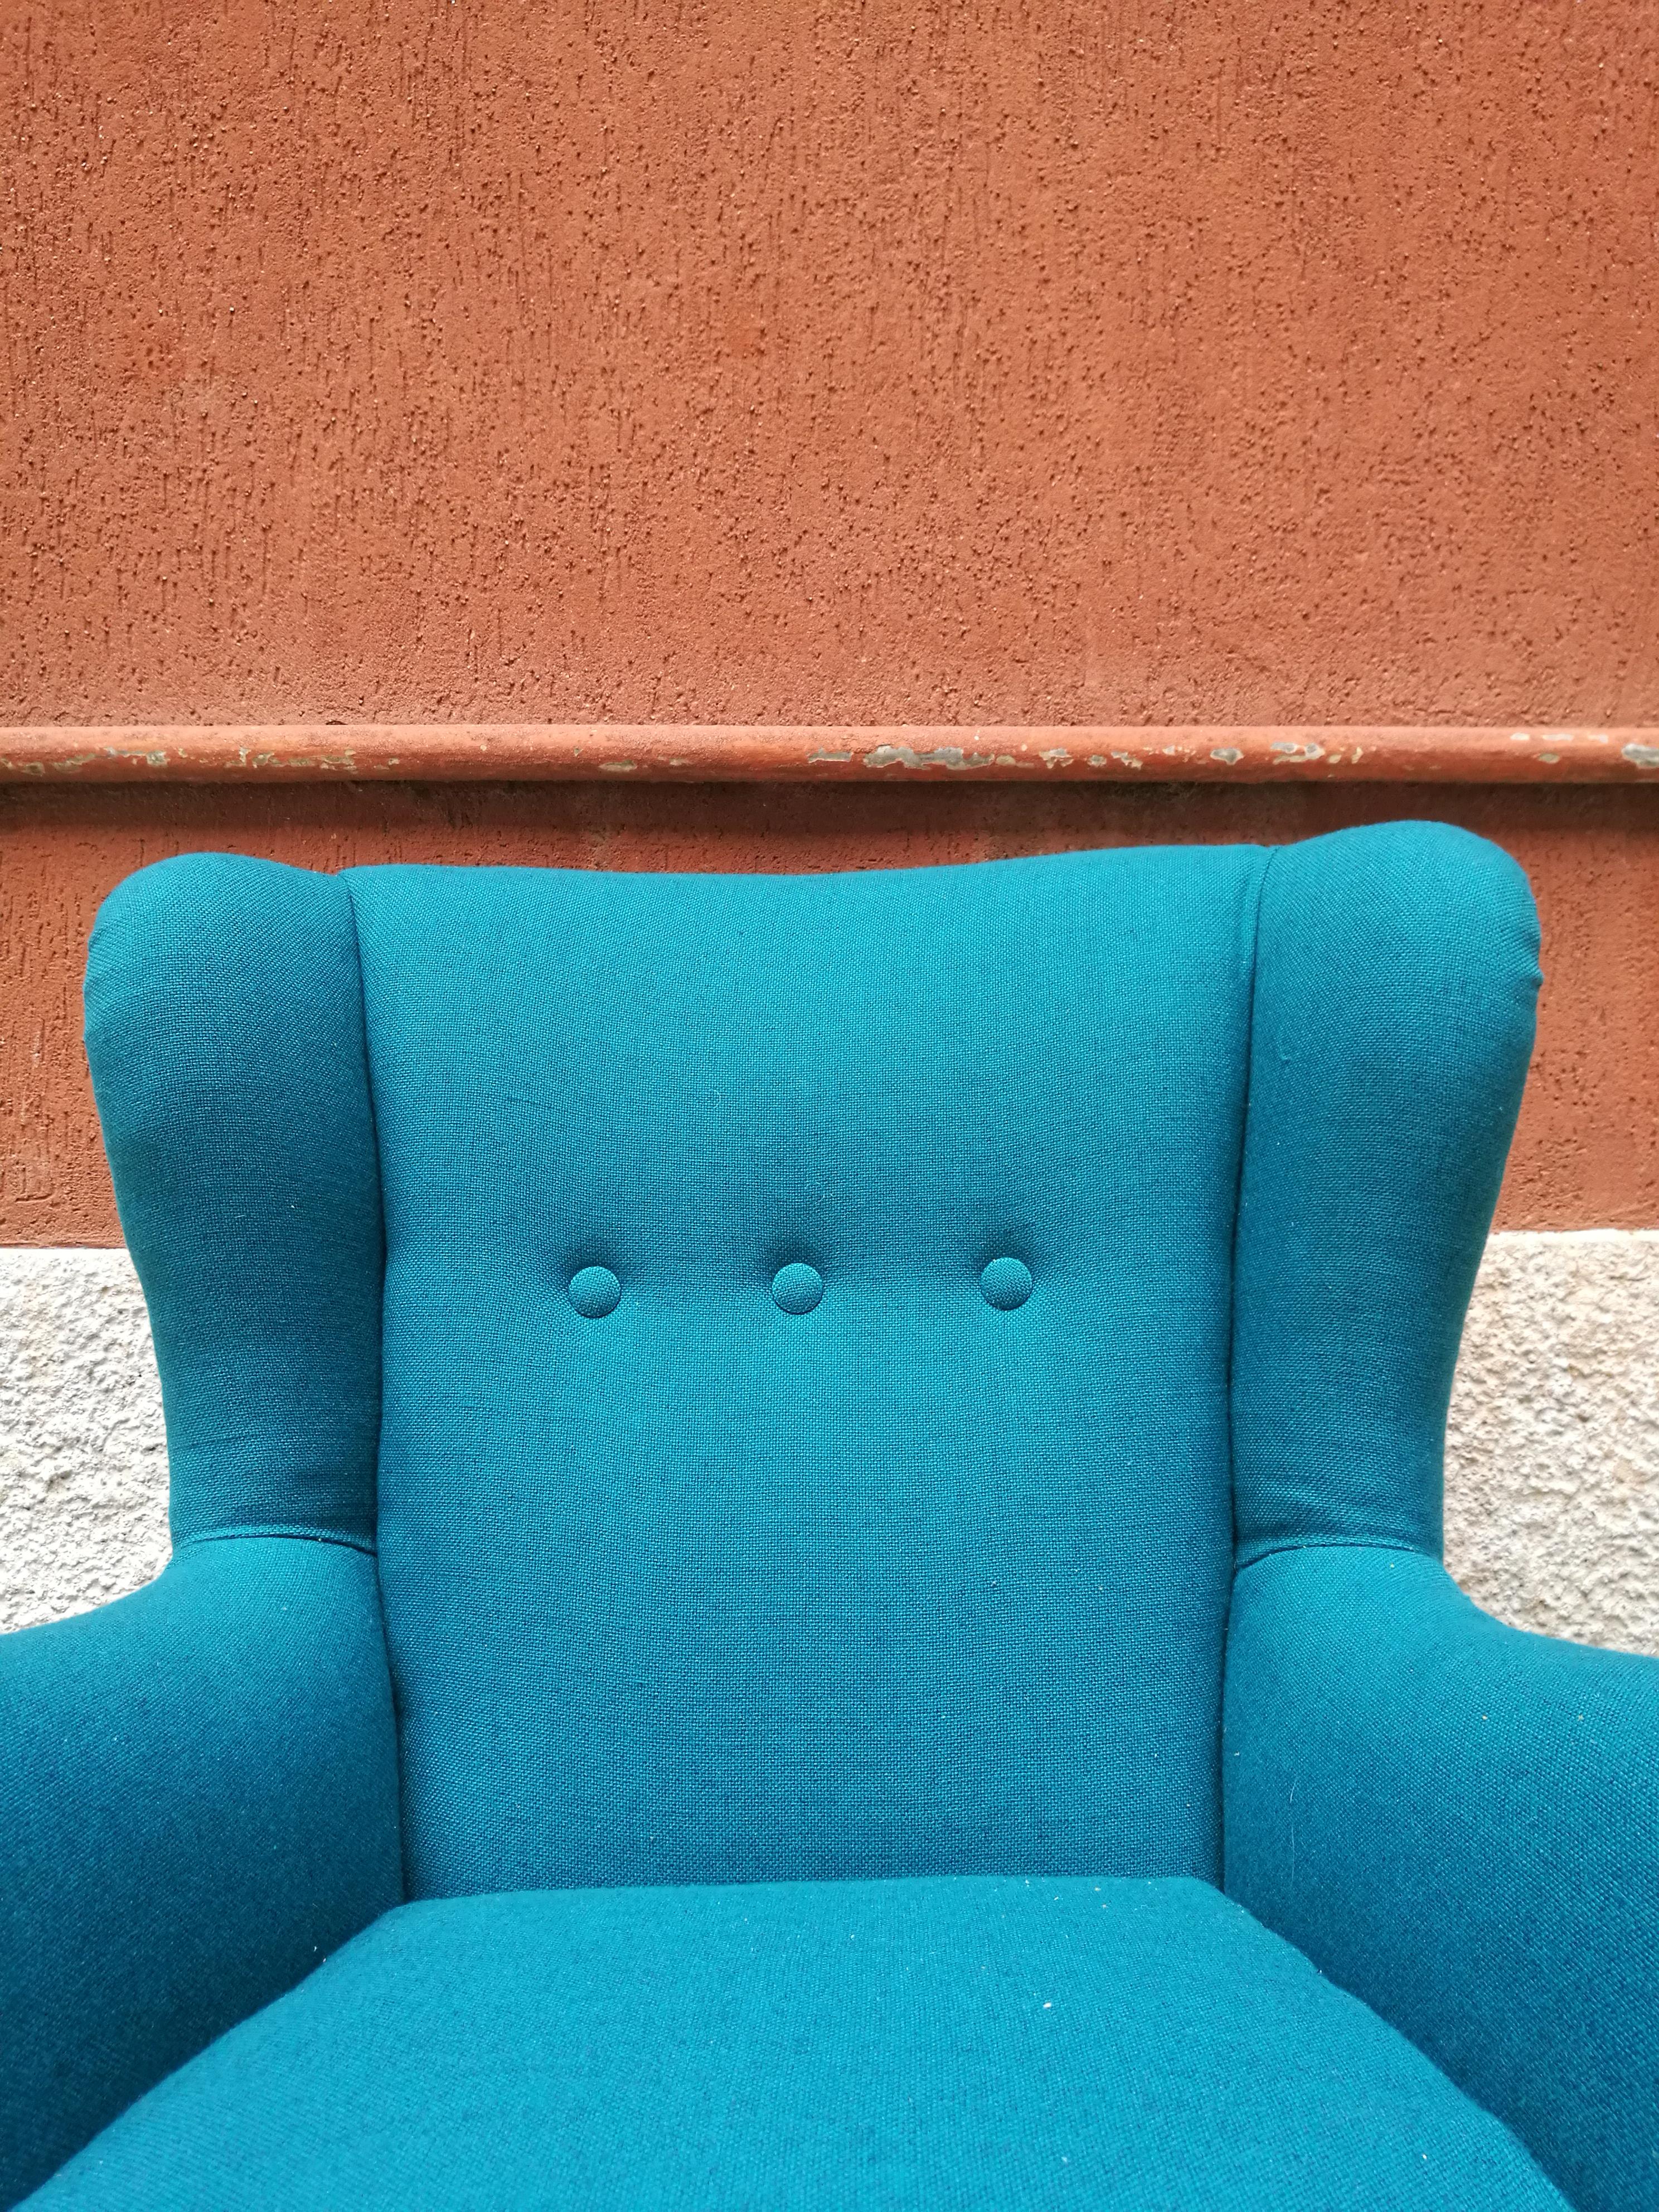 Mid-Century Modern Italian Teal-Colored Cotton and Beech Armchair, 1960s